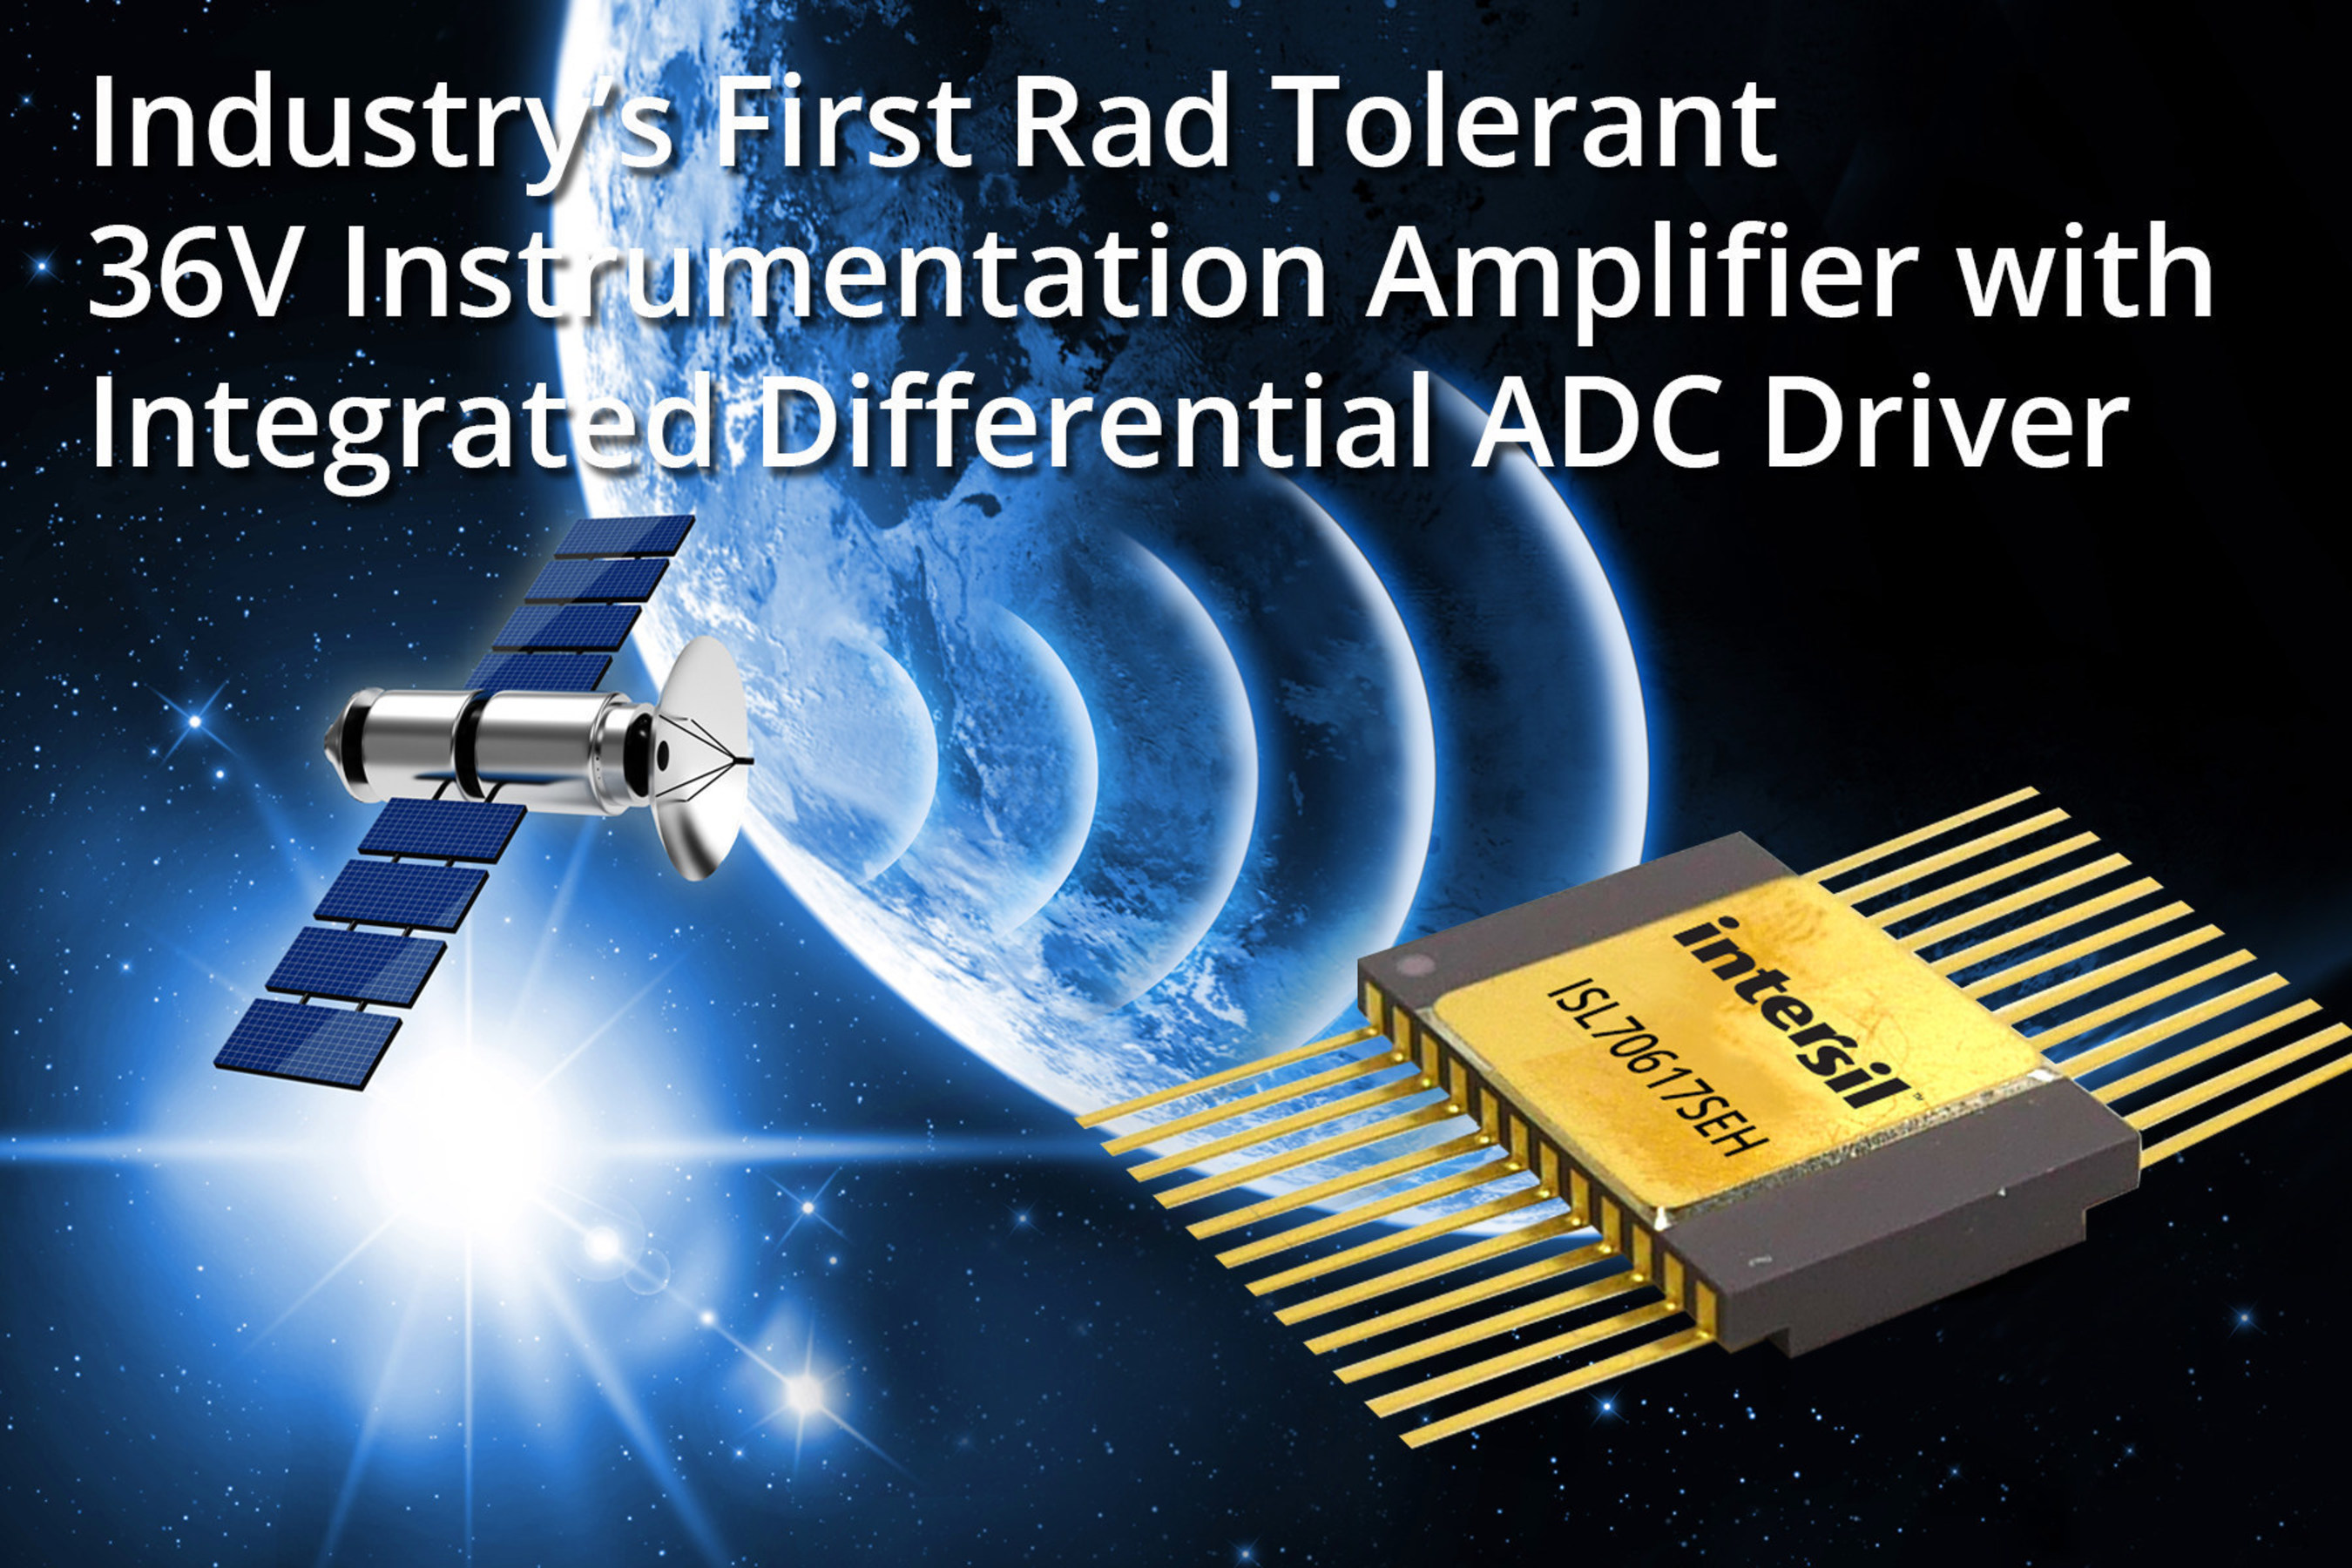 Intersil ships industry's first rad tolerant 36V instrumentation amplifier with integrated differential ADC driver. The ISL70617SEH provides highest sensor signal processing performance for communication satellite applications.